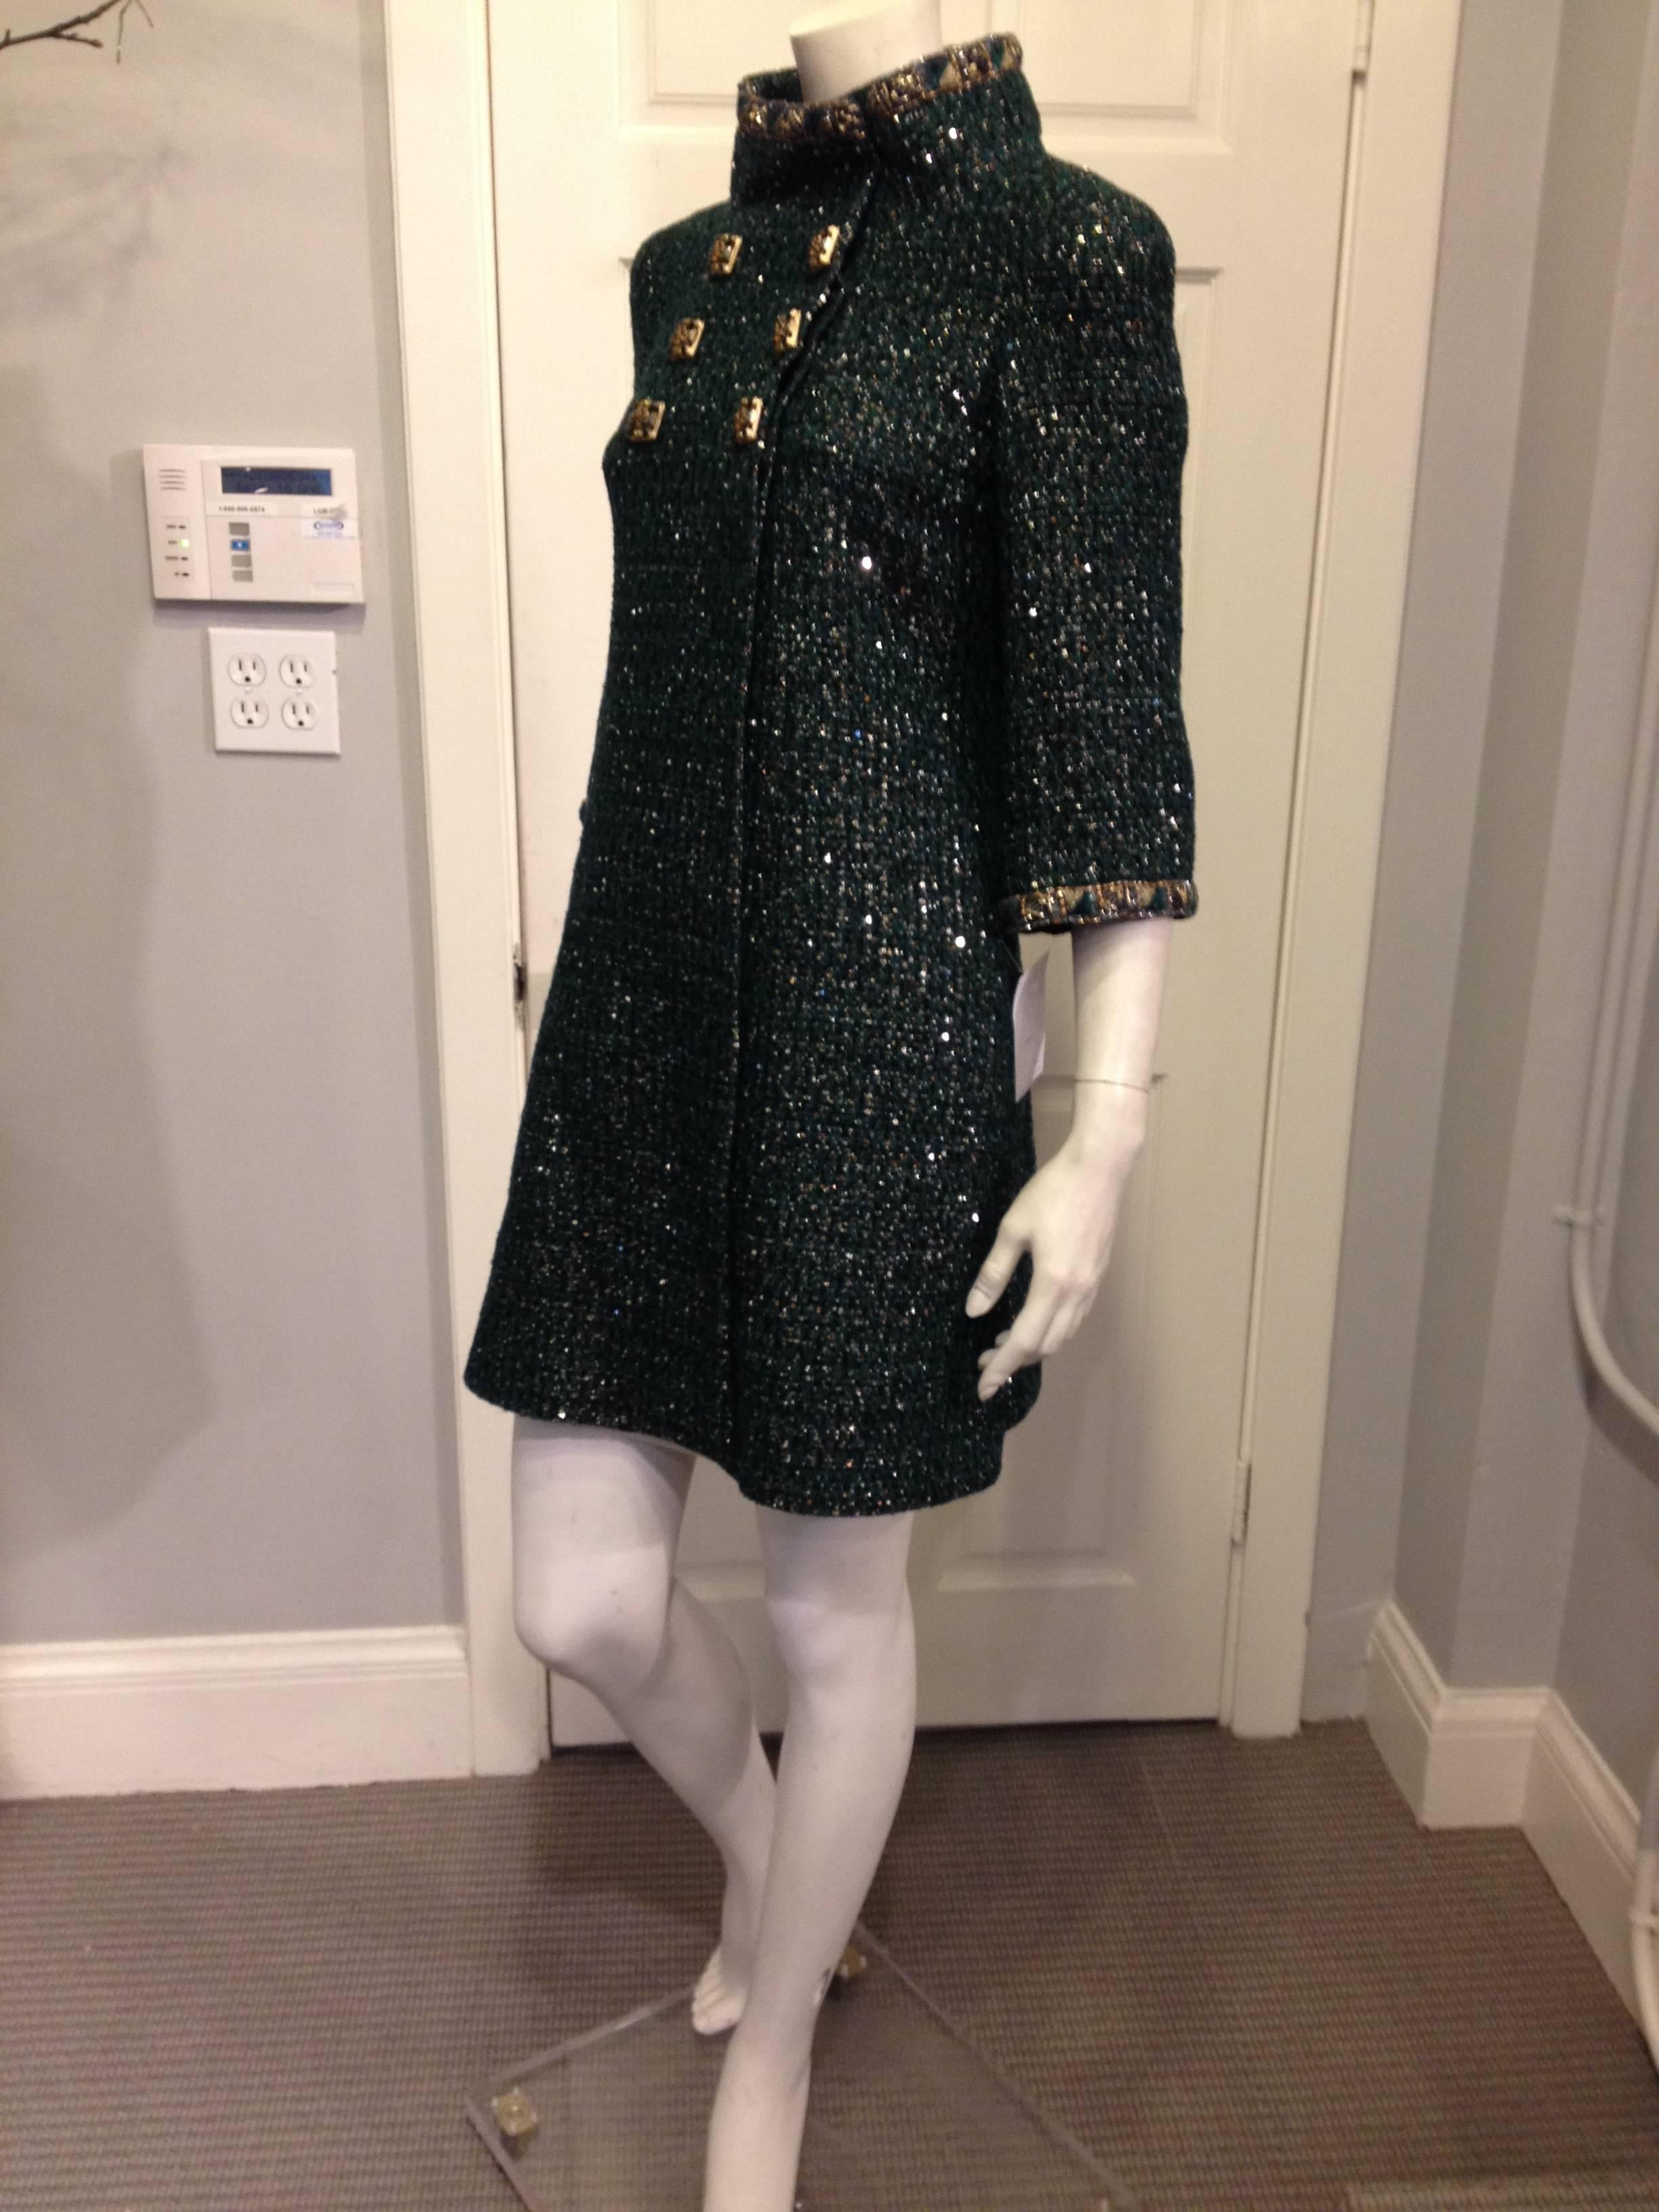 Sparkling dark serpentine green makes this Chanel coat a beautiful and unexpected choice, perfect for glamorous evenings and holiday events. The green tweed is variegated, with flecks of black and gold metallic thread, complementing the gold